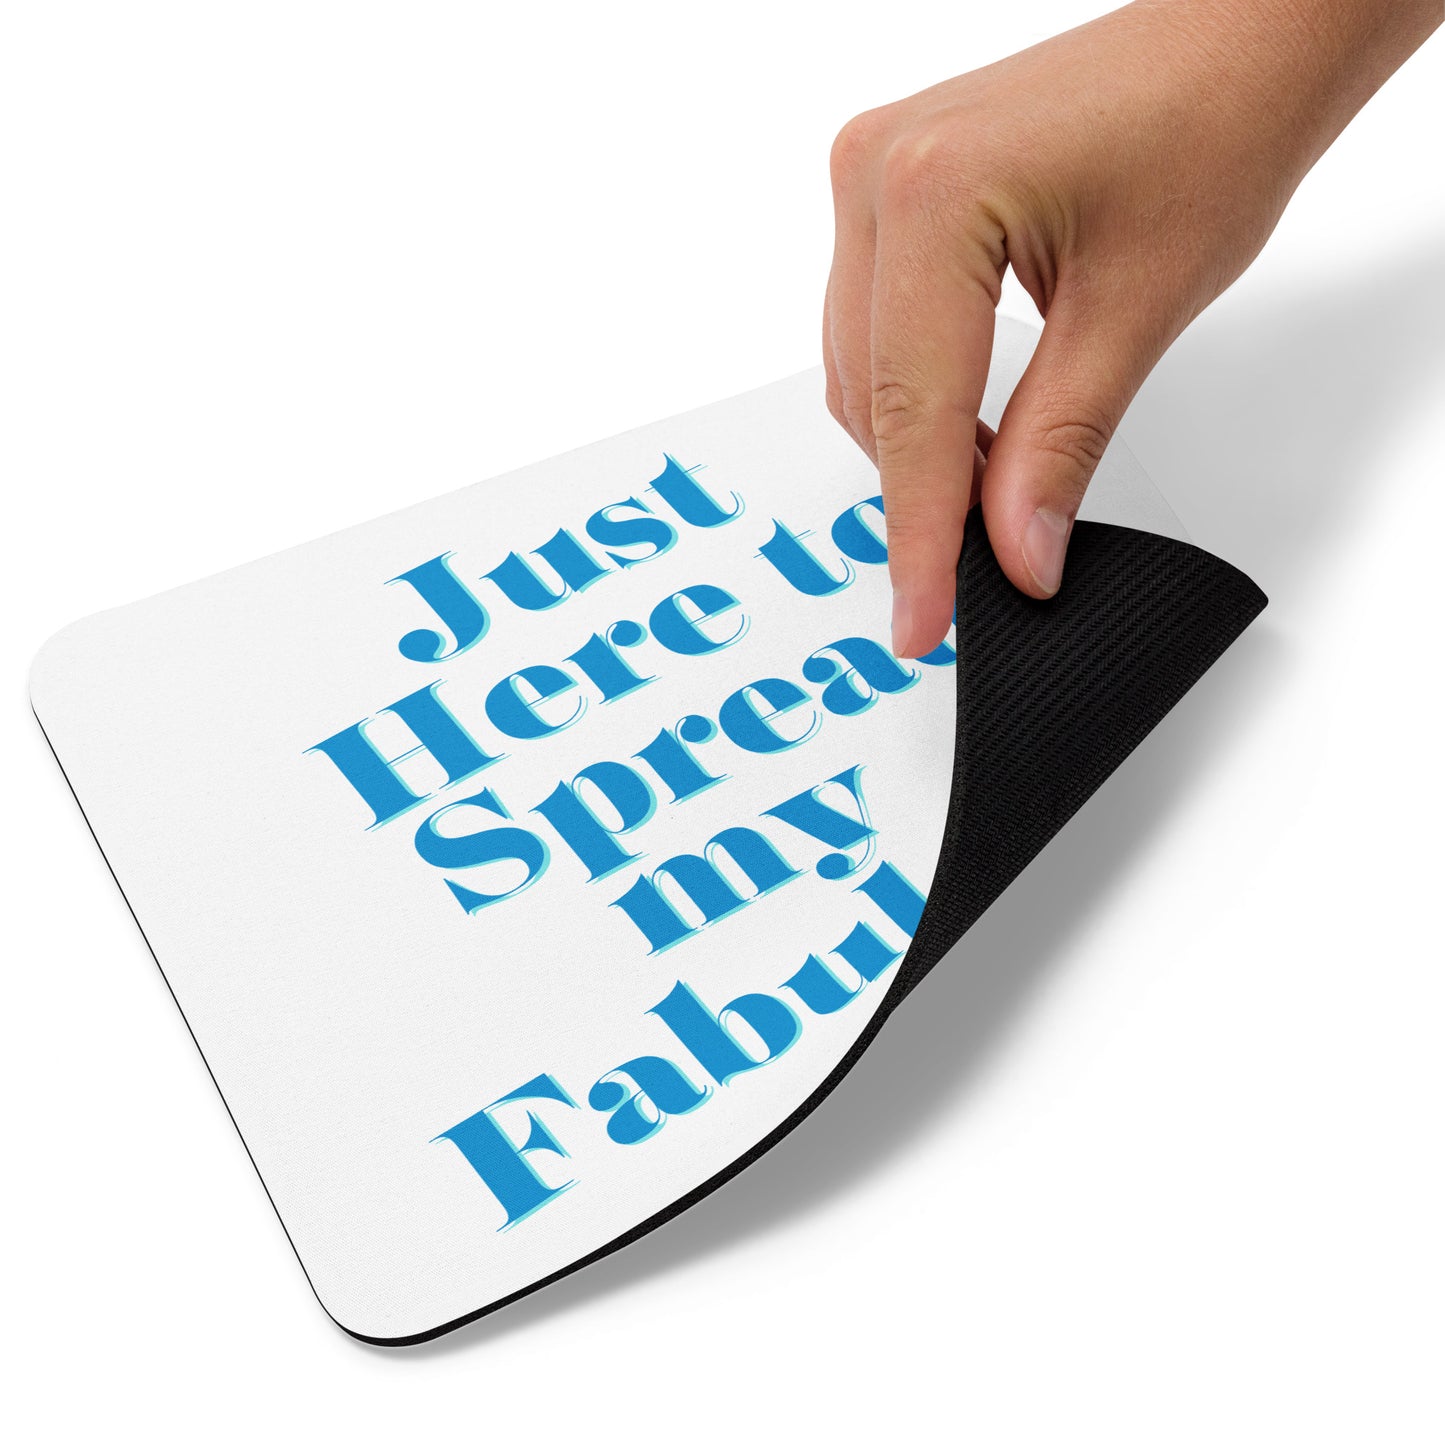 Spread the Fabulous Mouse pad